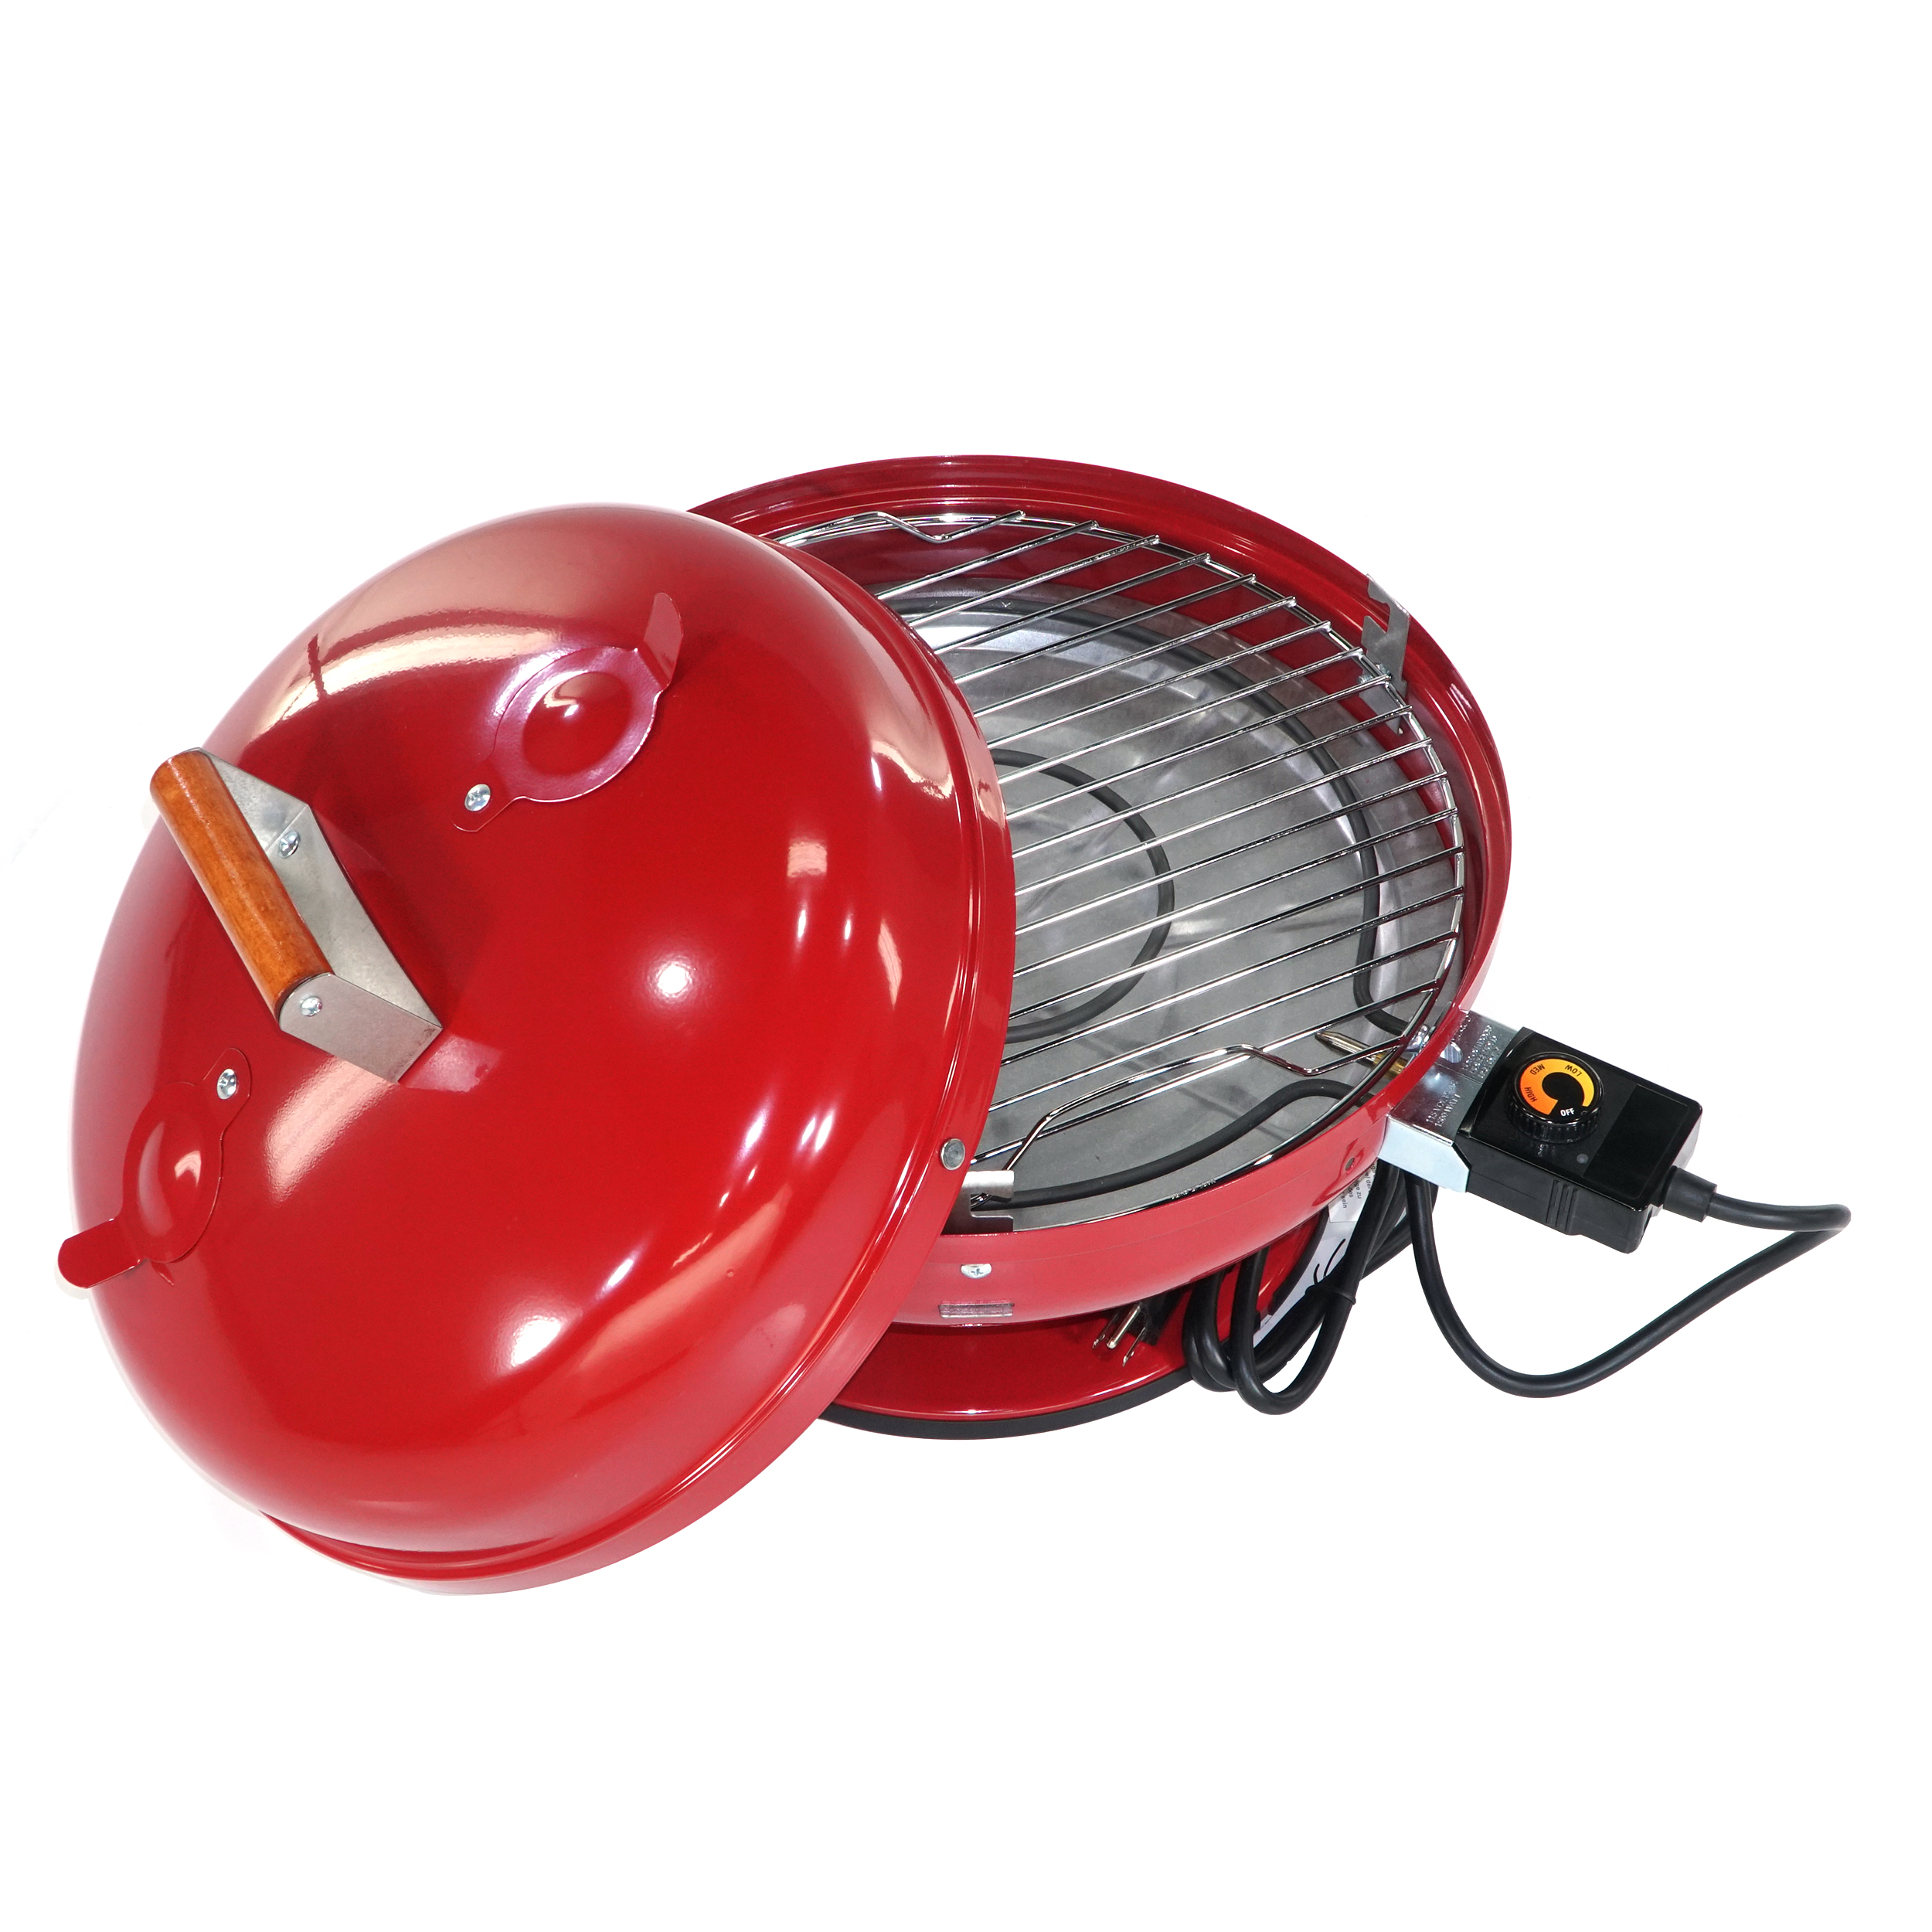 Americana Lock 'N Go Portable Electric Grill - Red - image 4 of 8